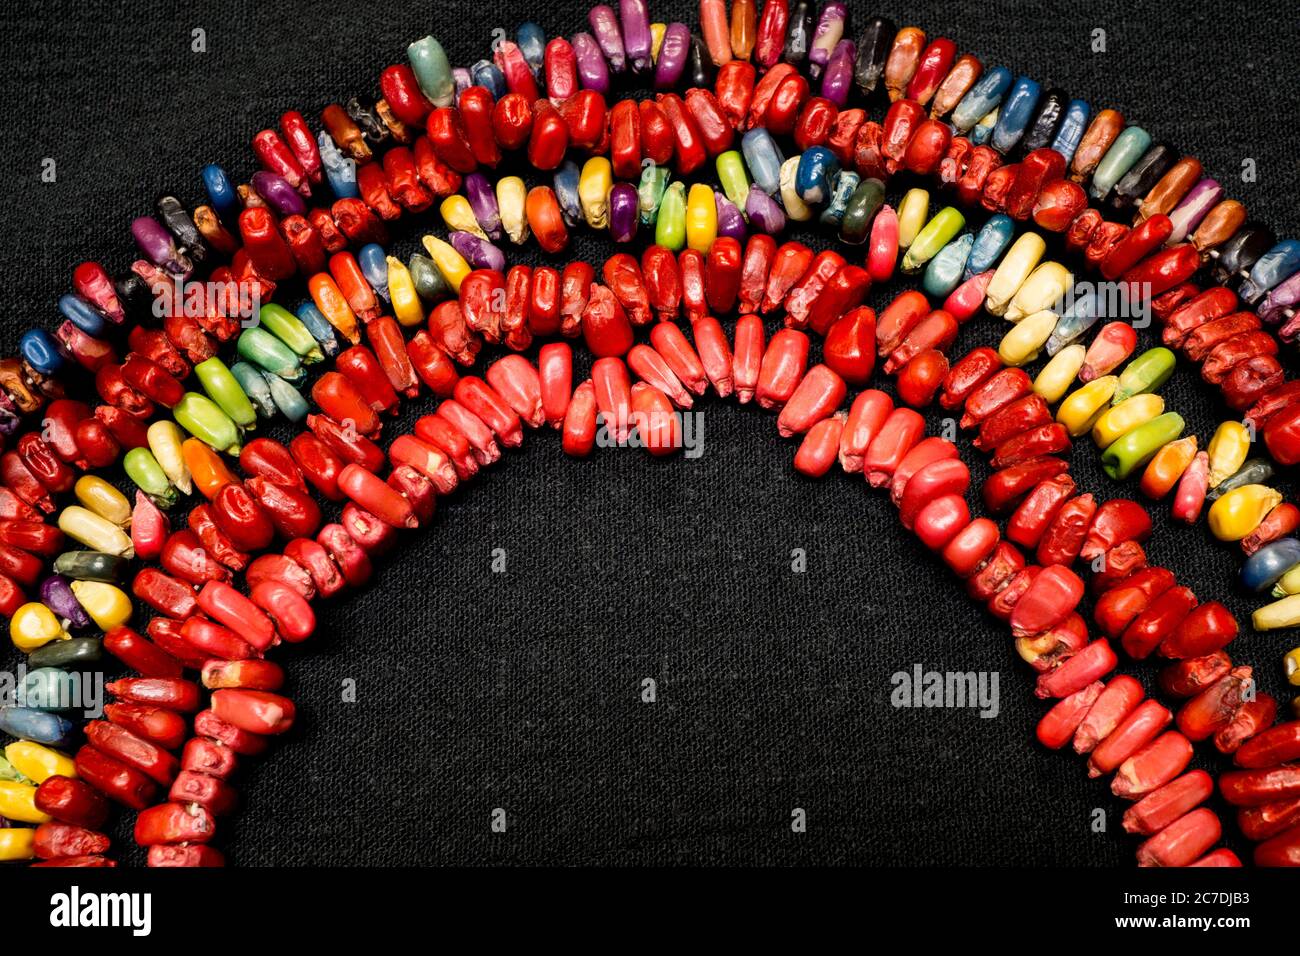 Colorful candy pieces shaped into a rainbow design on a black background. Stock Photo